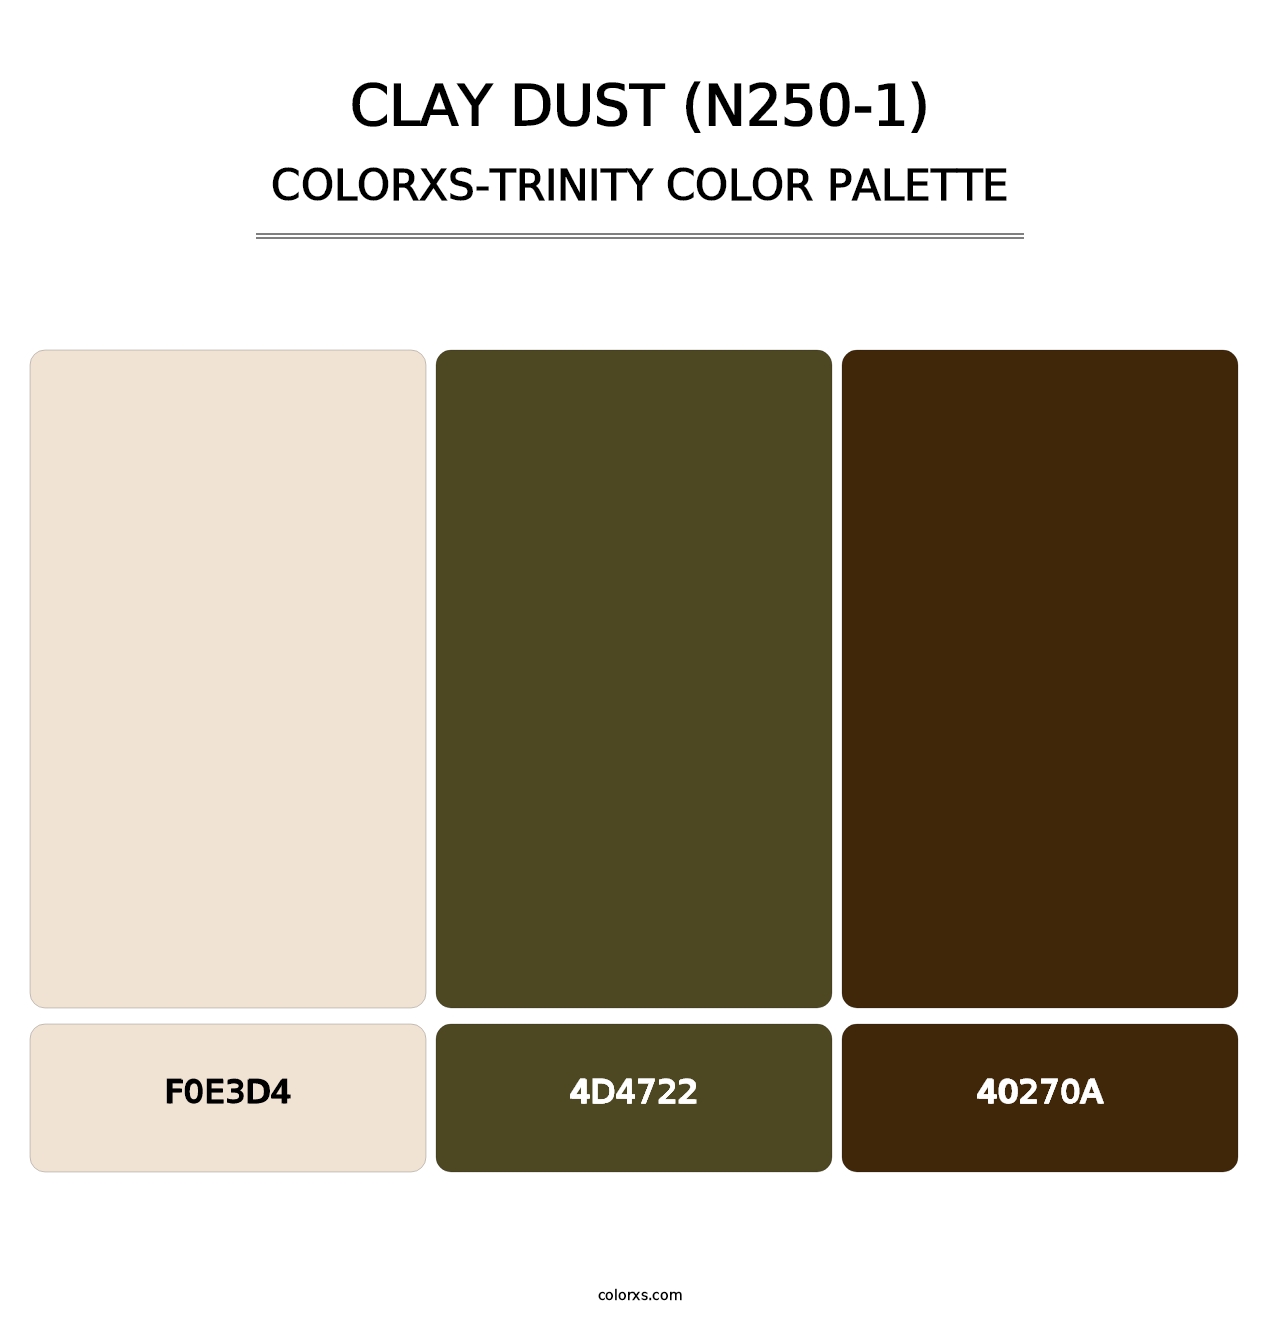 Clay Dust (N250-1) - Colorxs Trinity Palette